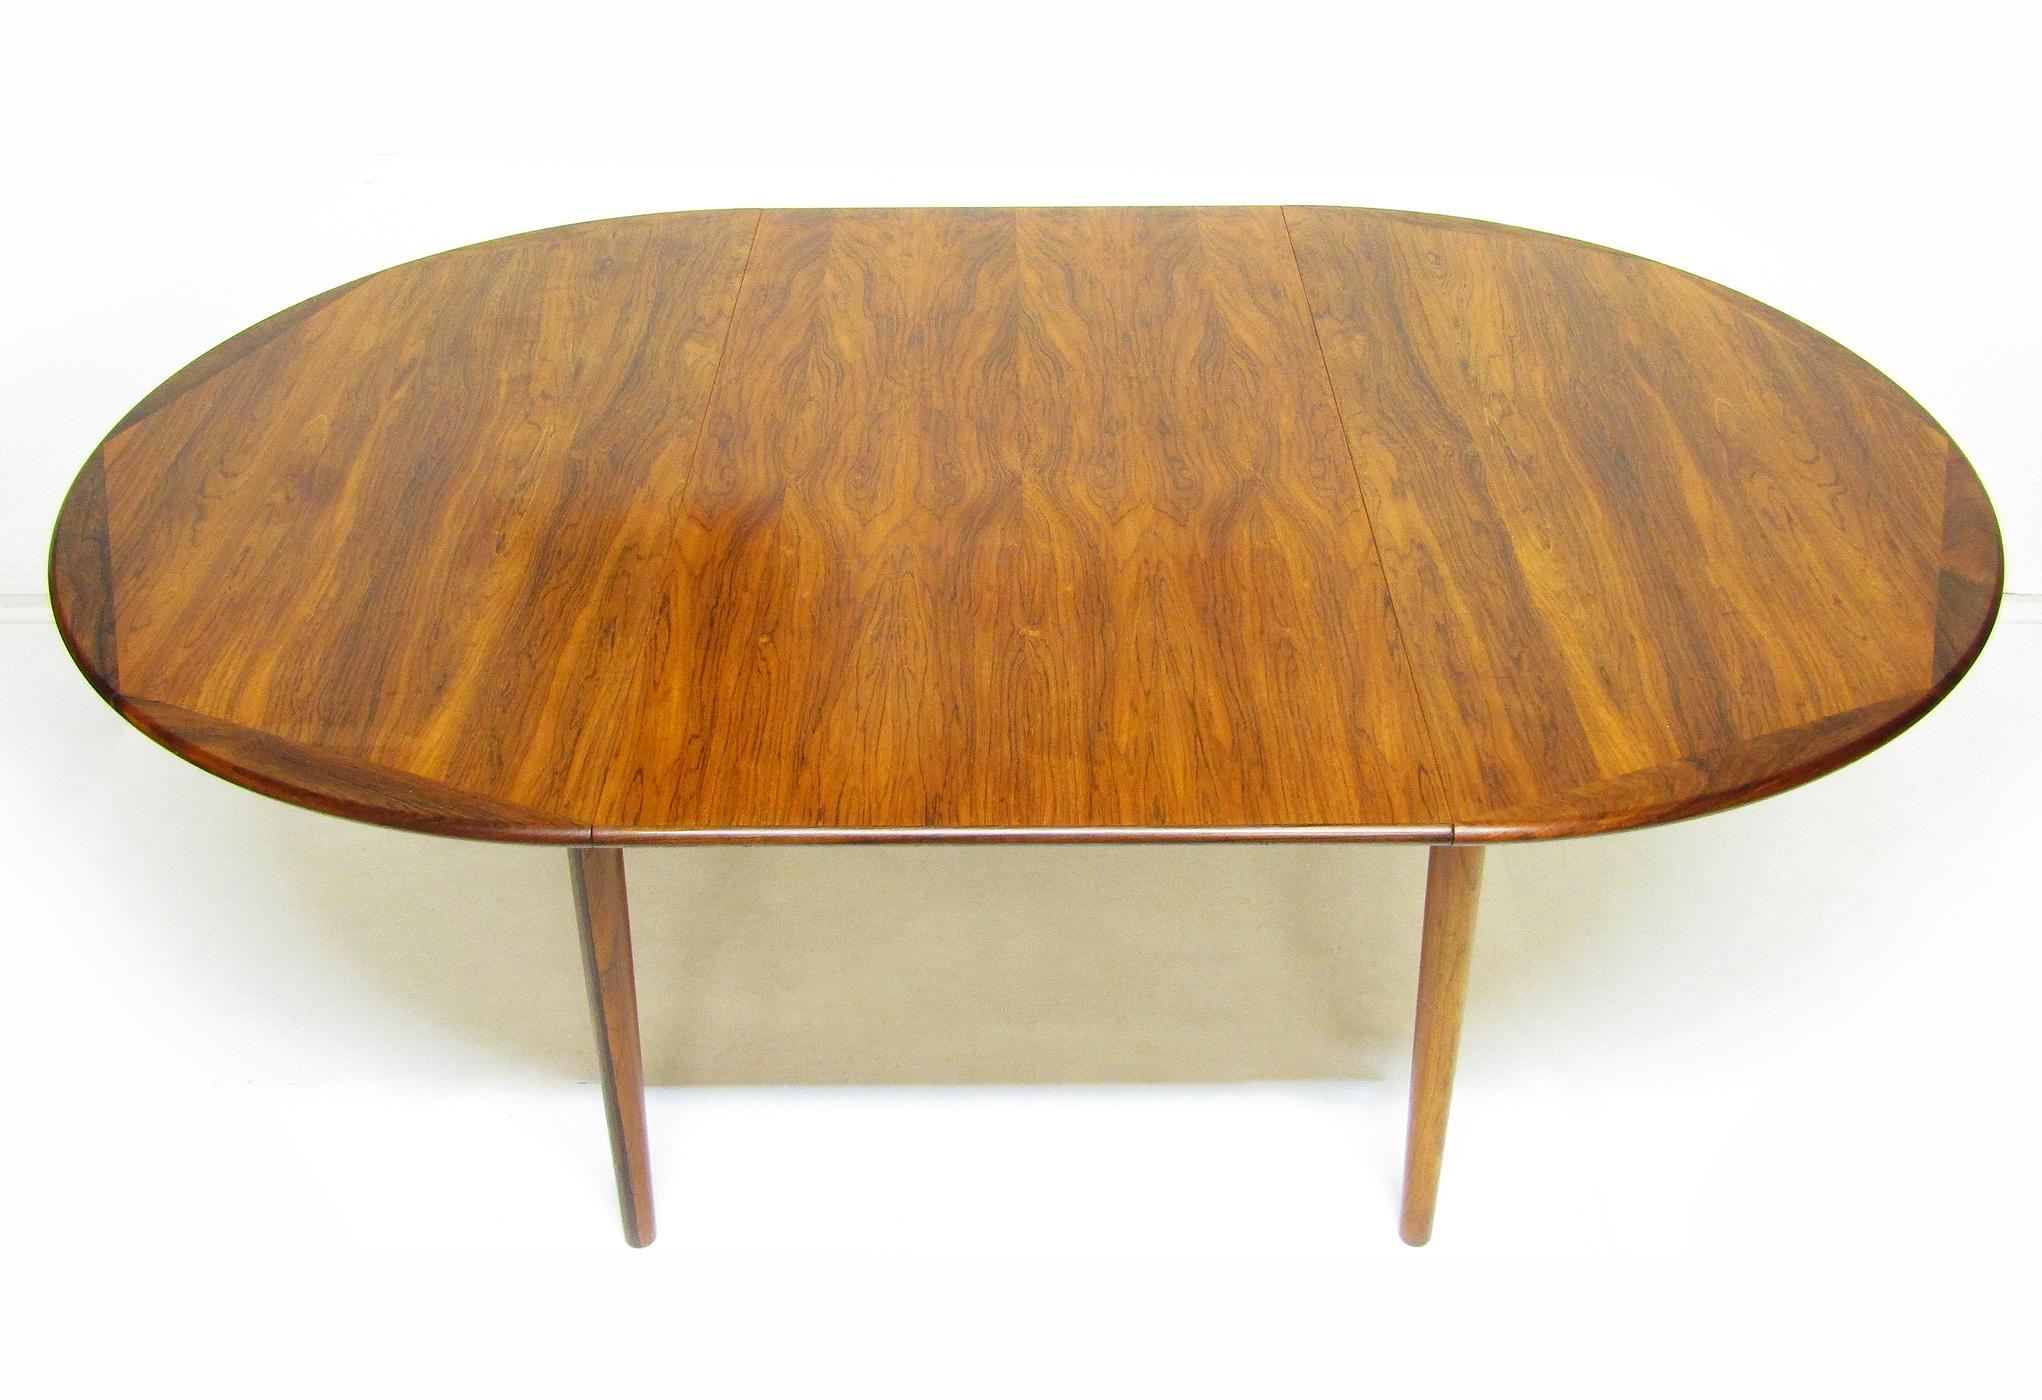 A beautiful 1960s Danish rosewood extending dining table by Georg Petersens.

The rosewood figuring is particularly fine, with a rich golden colour. Unlike many rosewood tables the leaf has approximately the same tone as the surrounding table.